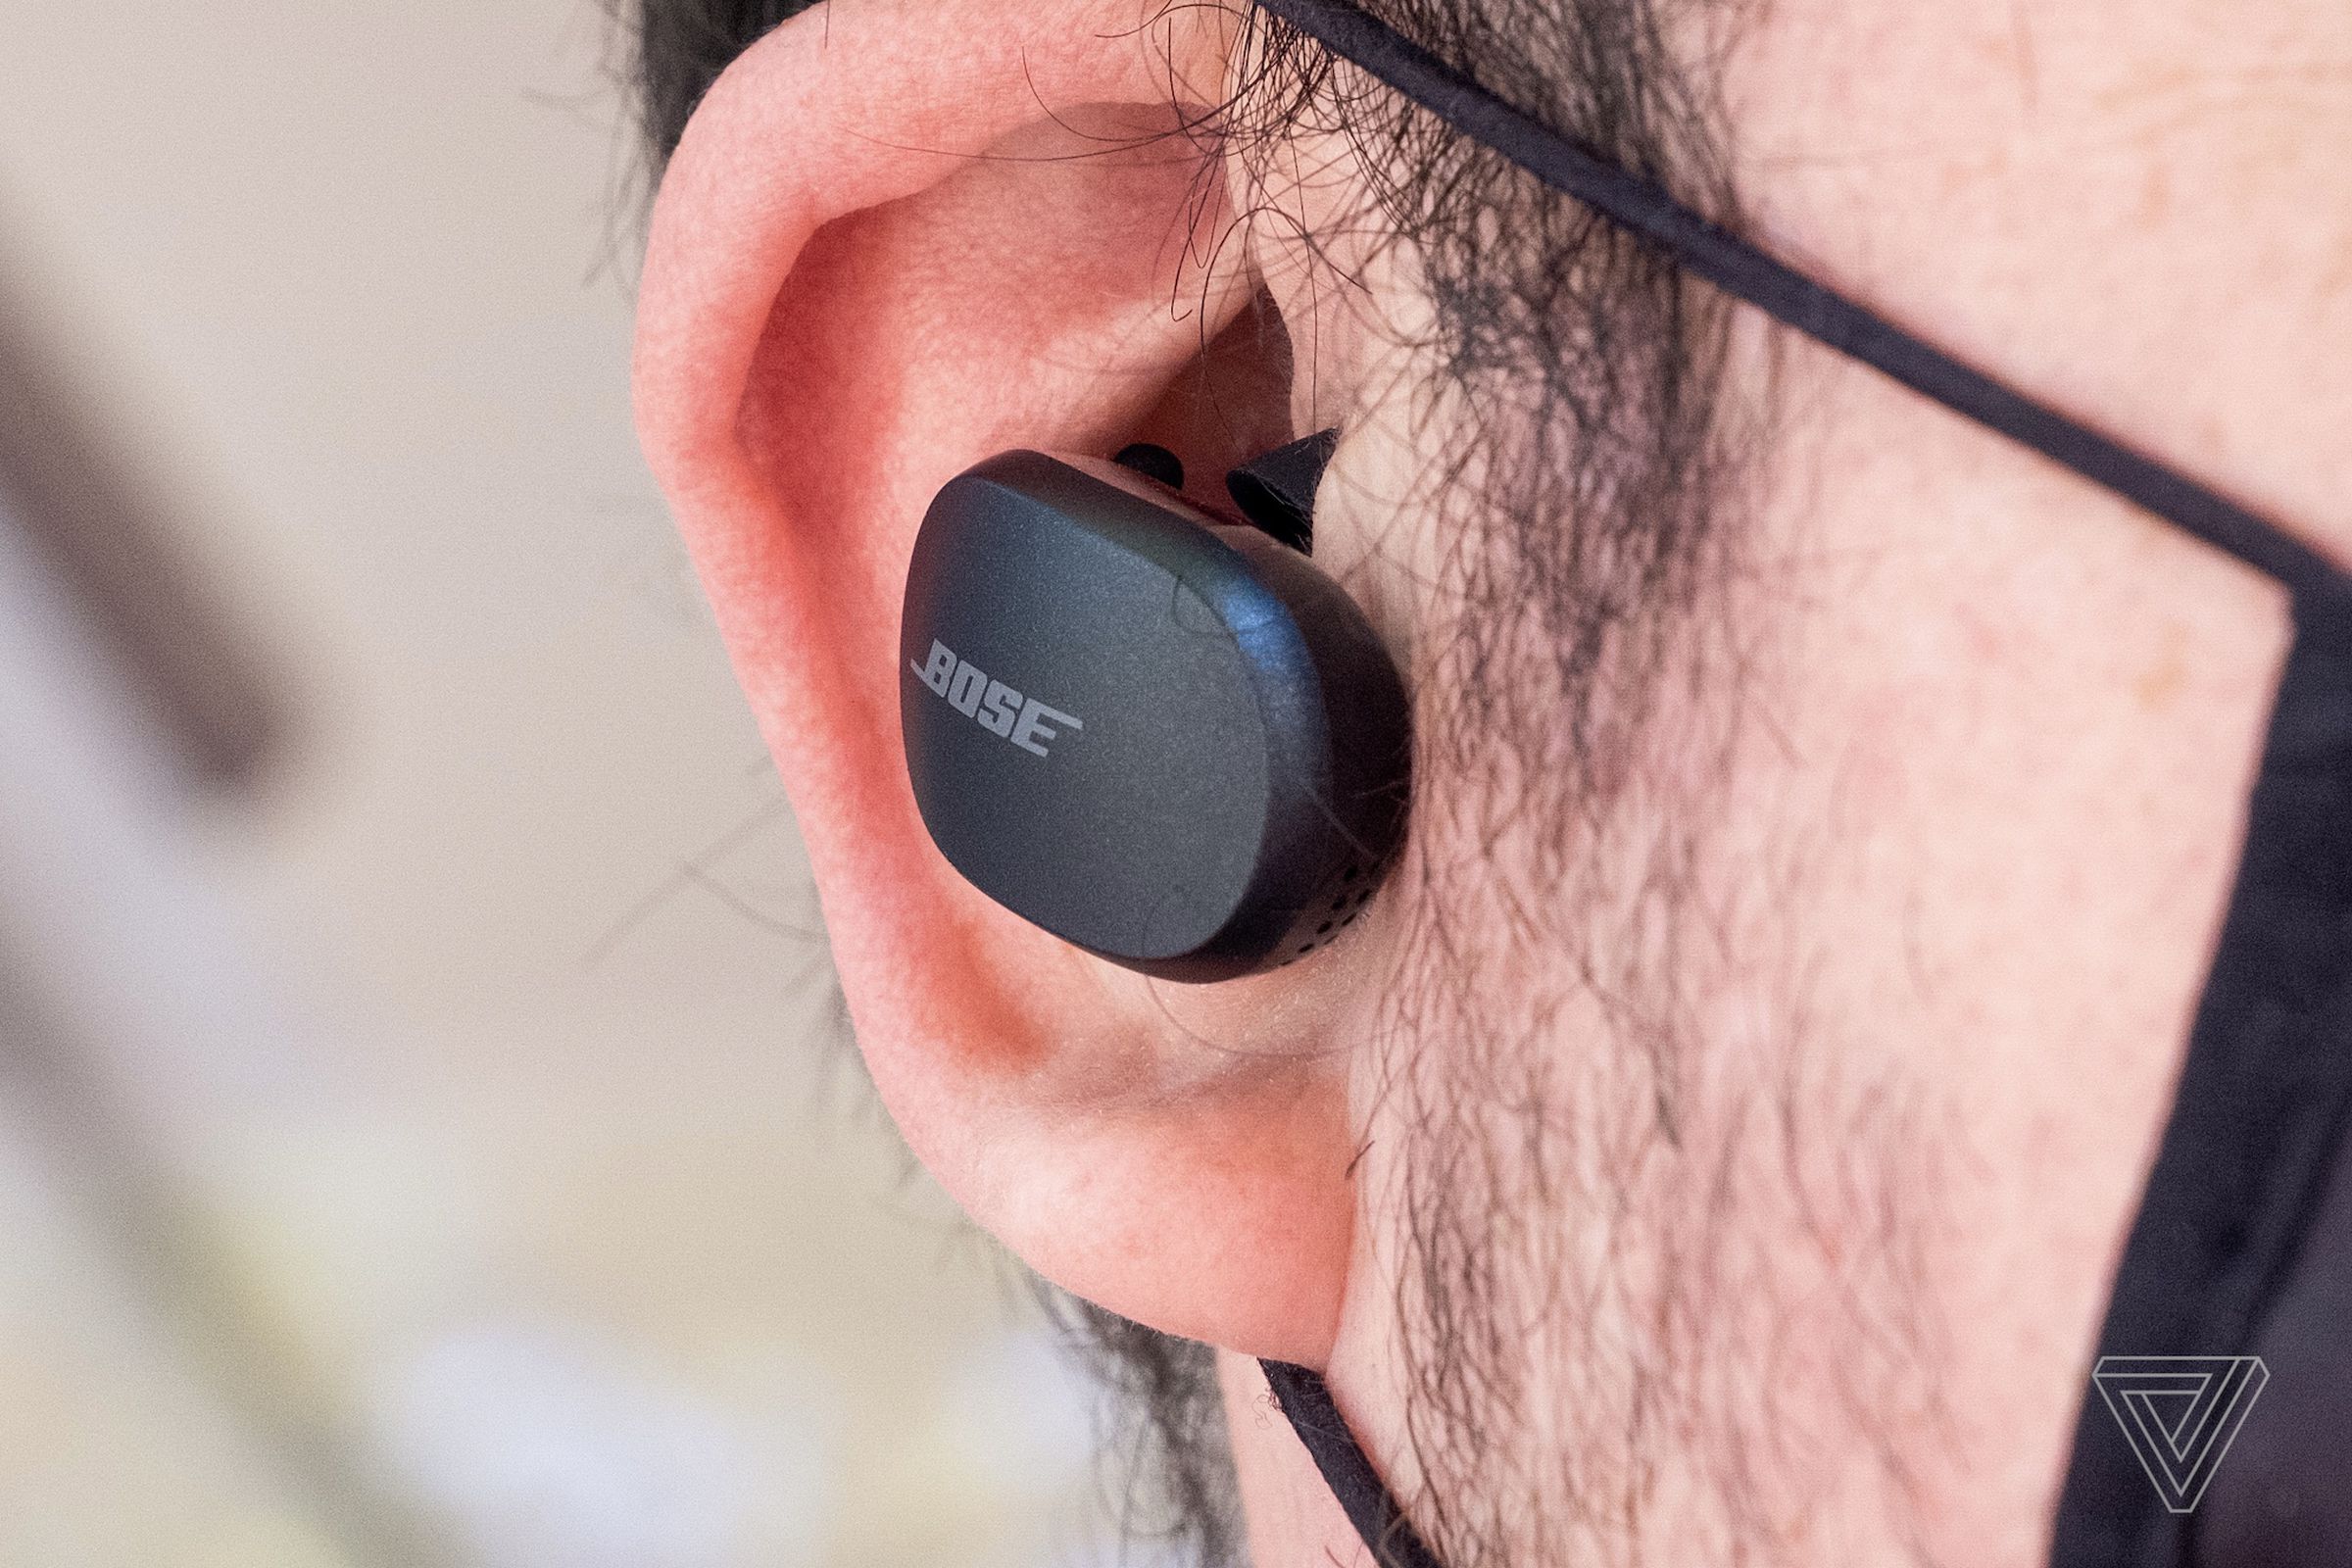 Bose’s QuietComfort Earbuds pictured worn in a person’s right ear.